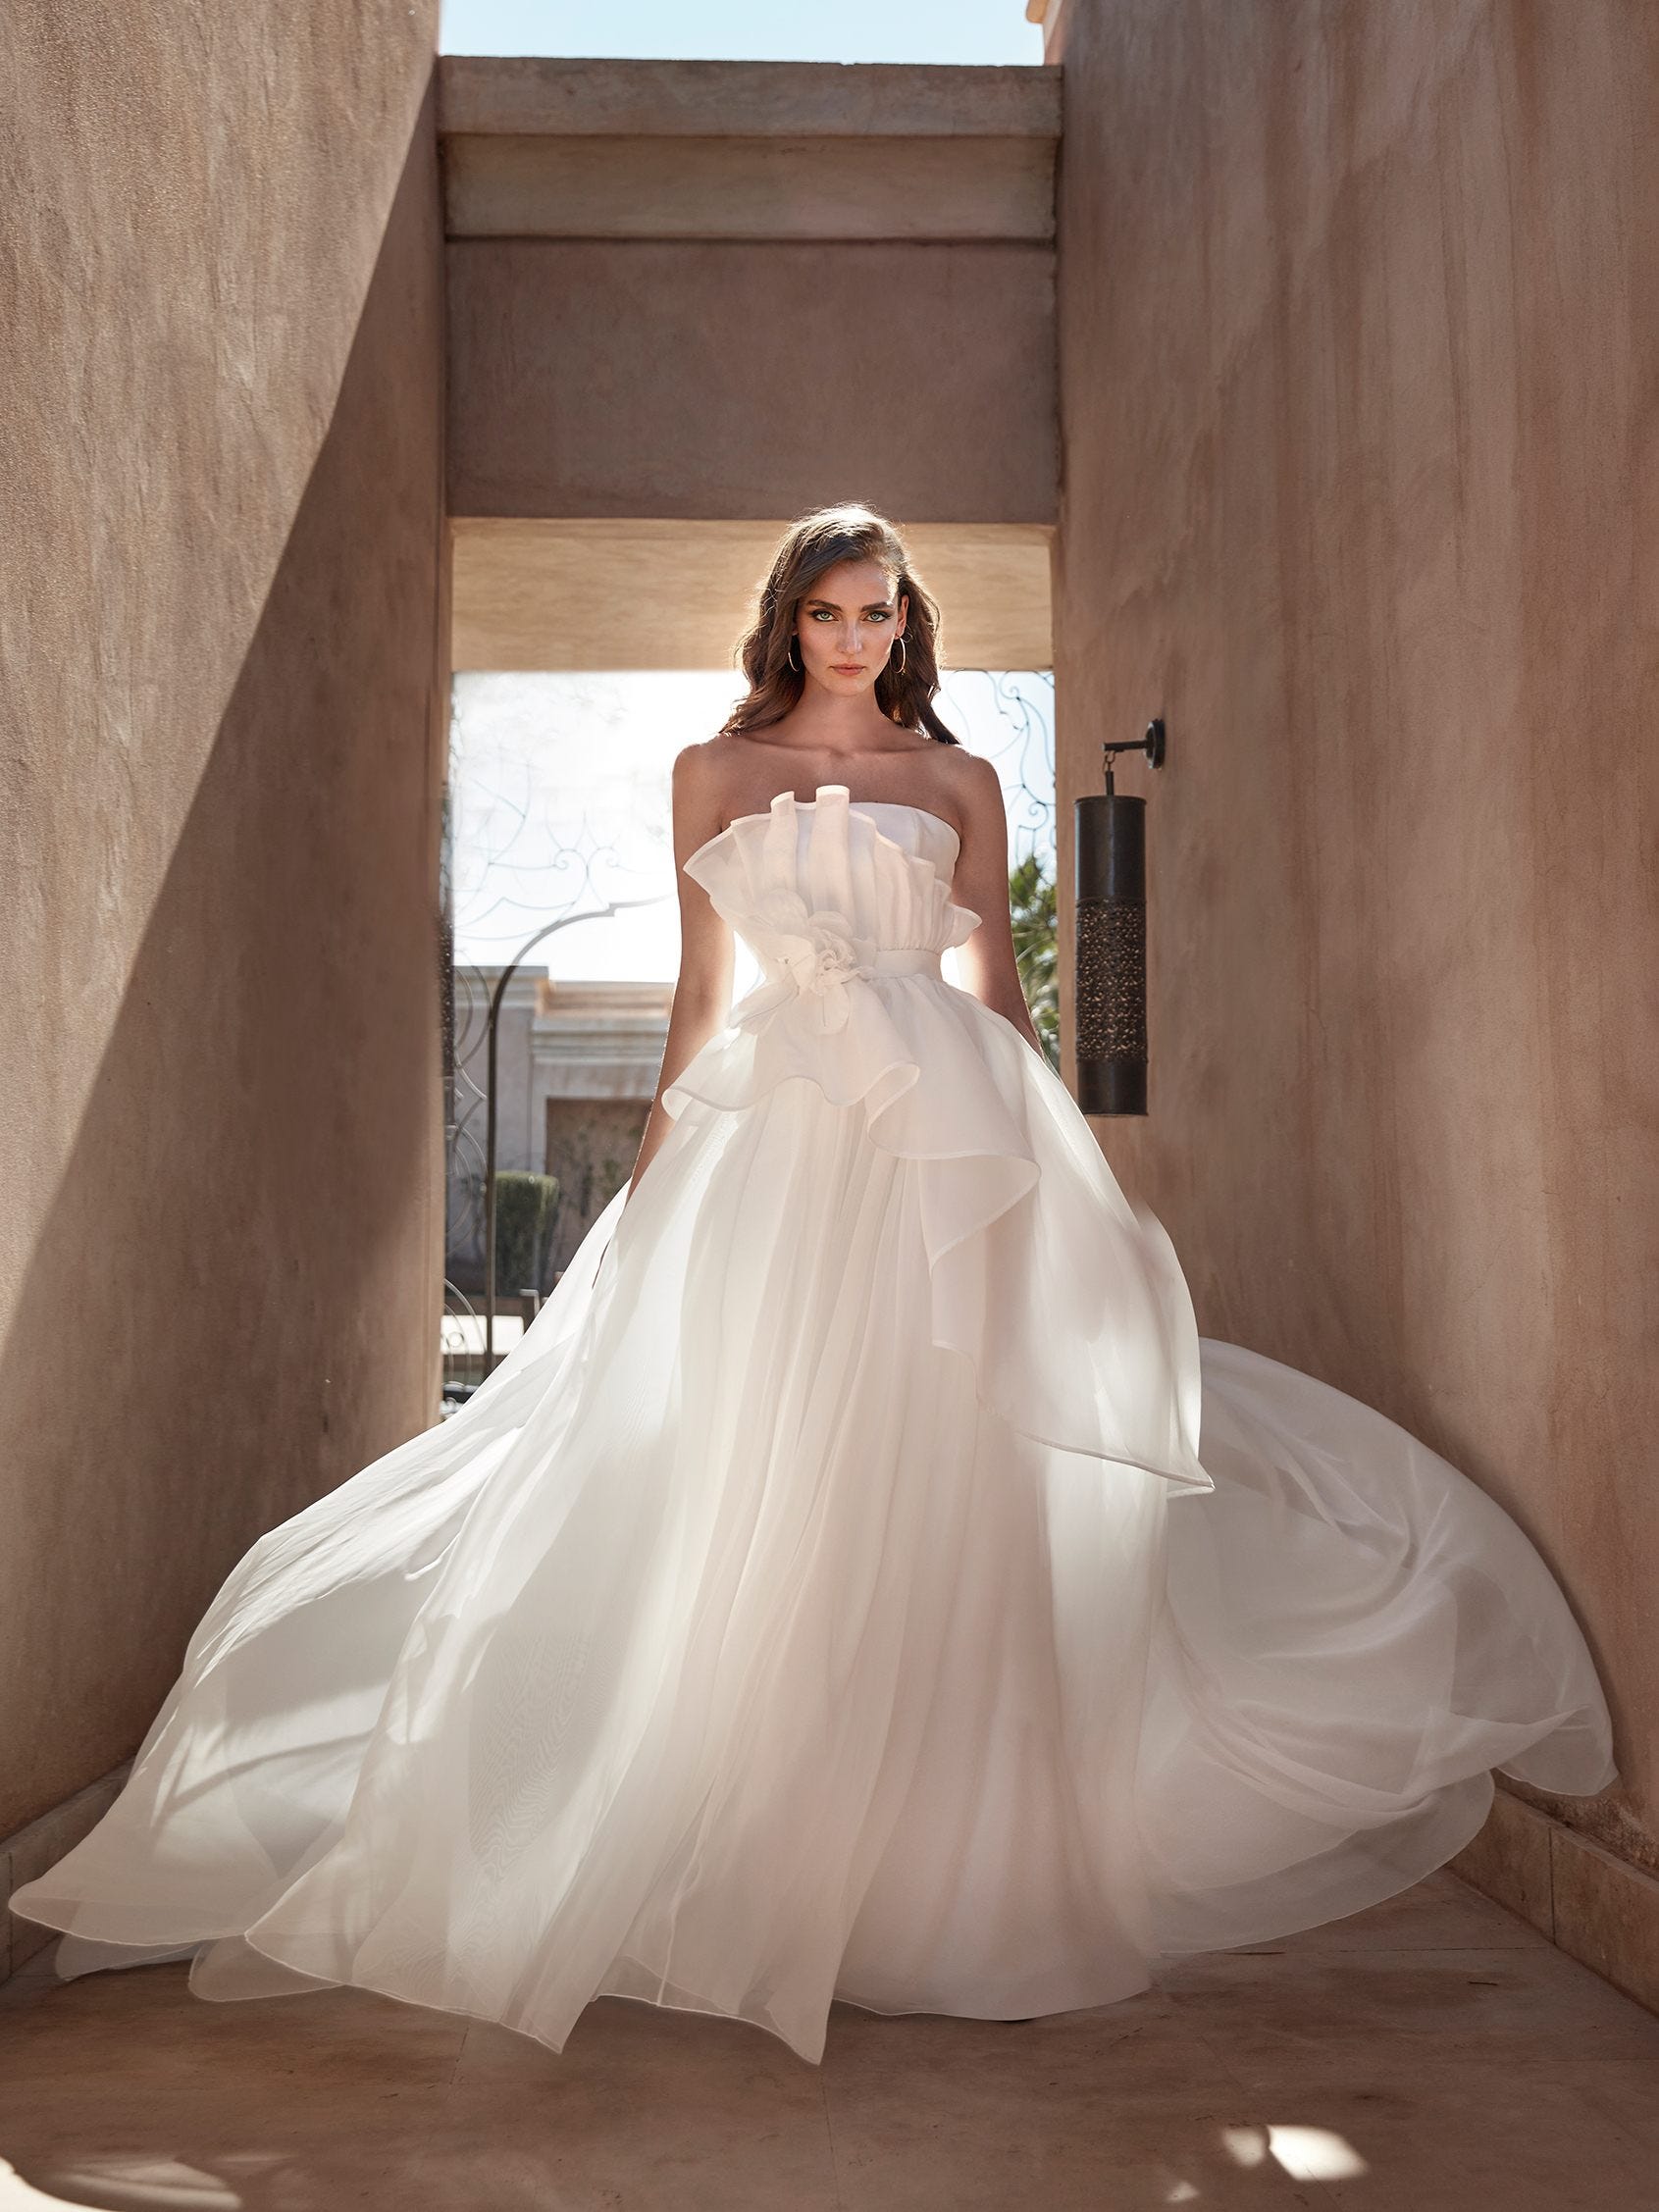 Strapless Wedding Dresses - Bridal Gowns